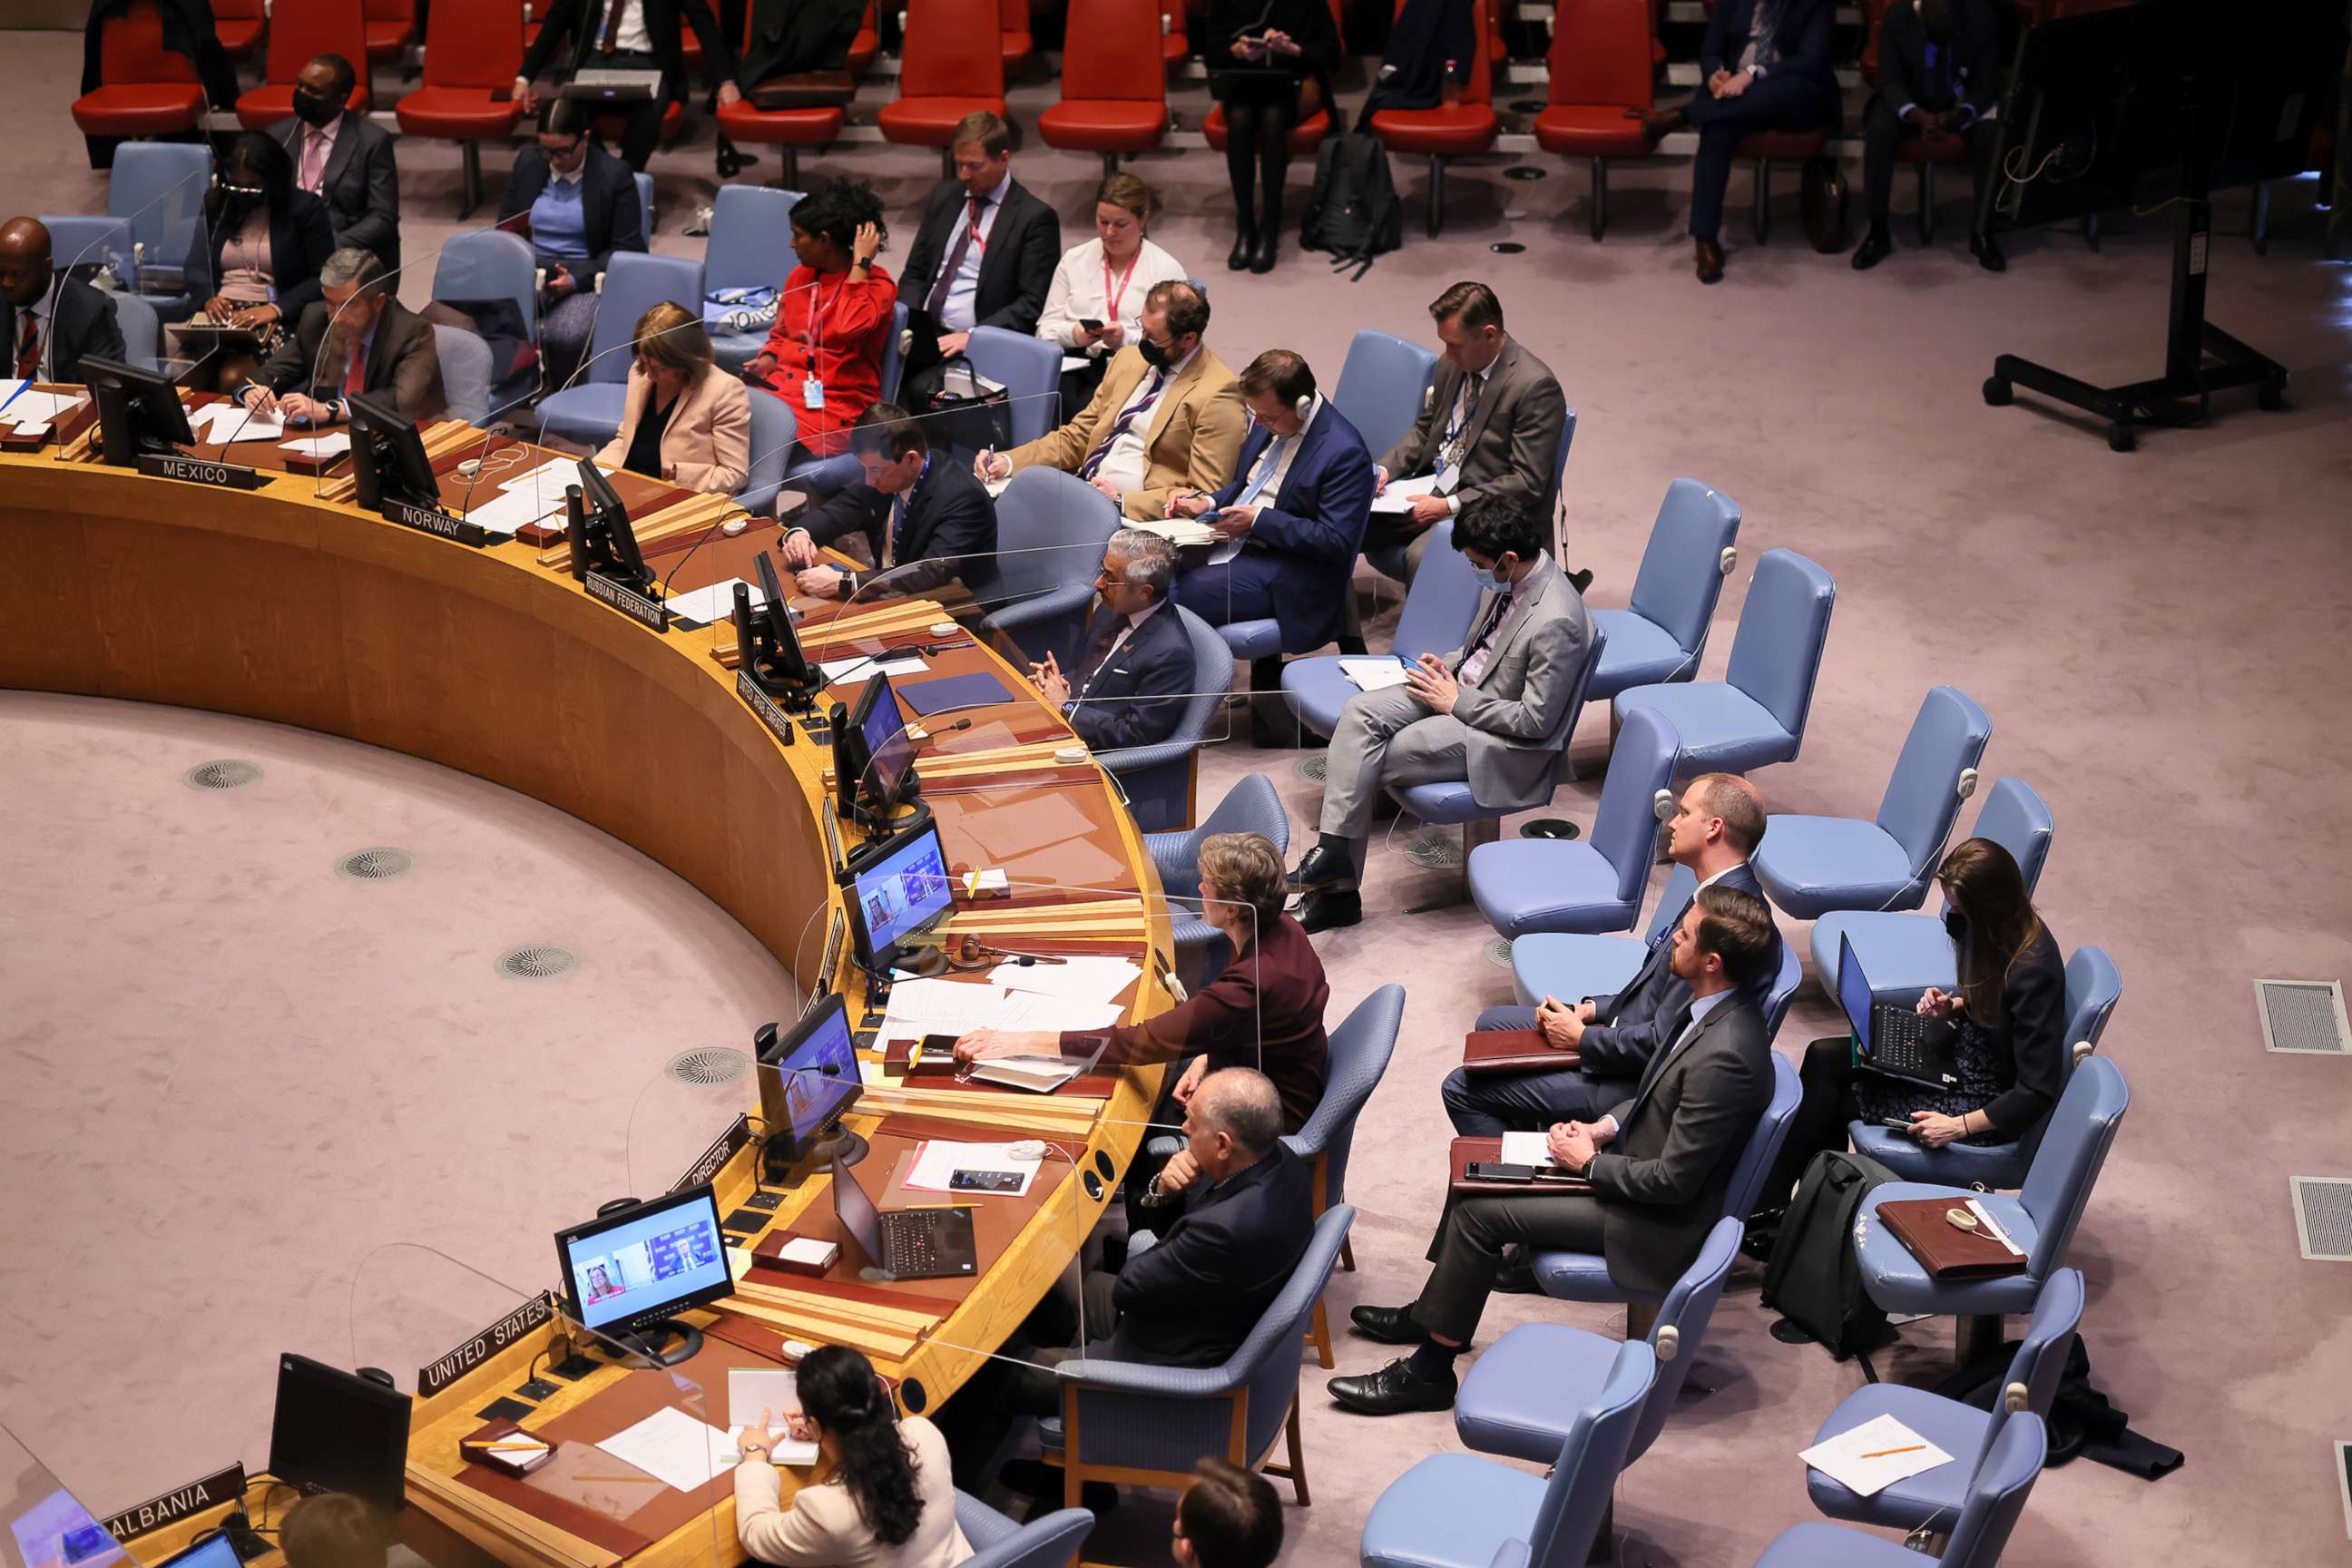 PHOTO: Members of the United Nations (UN) Security Council meet at the UN, April 19, 2022, in New York.